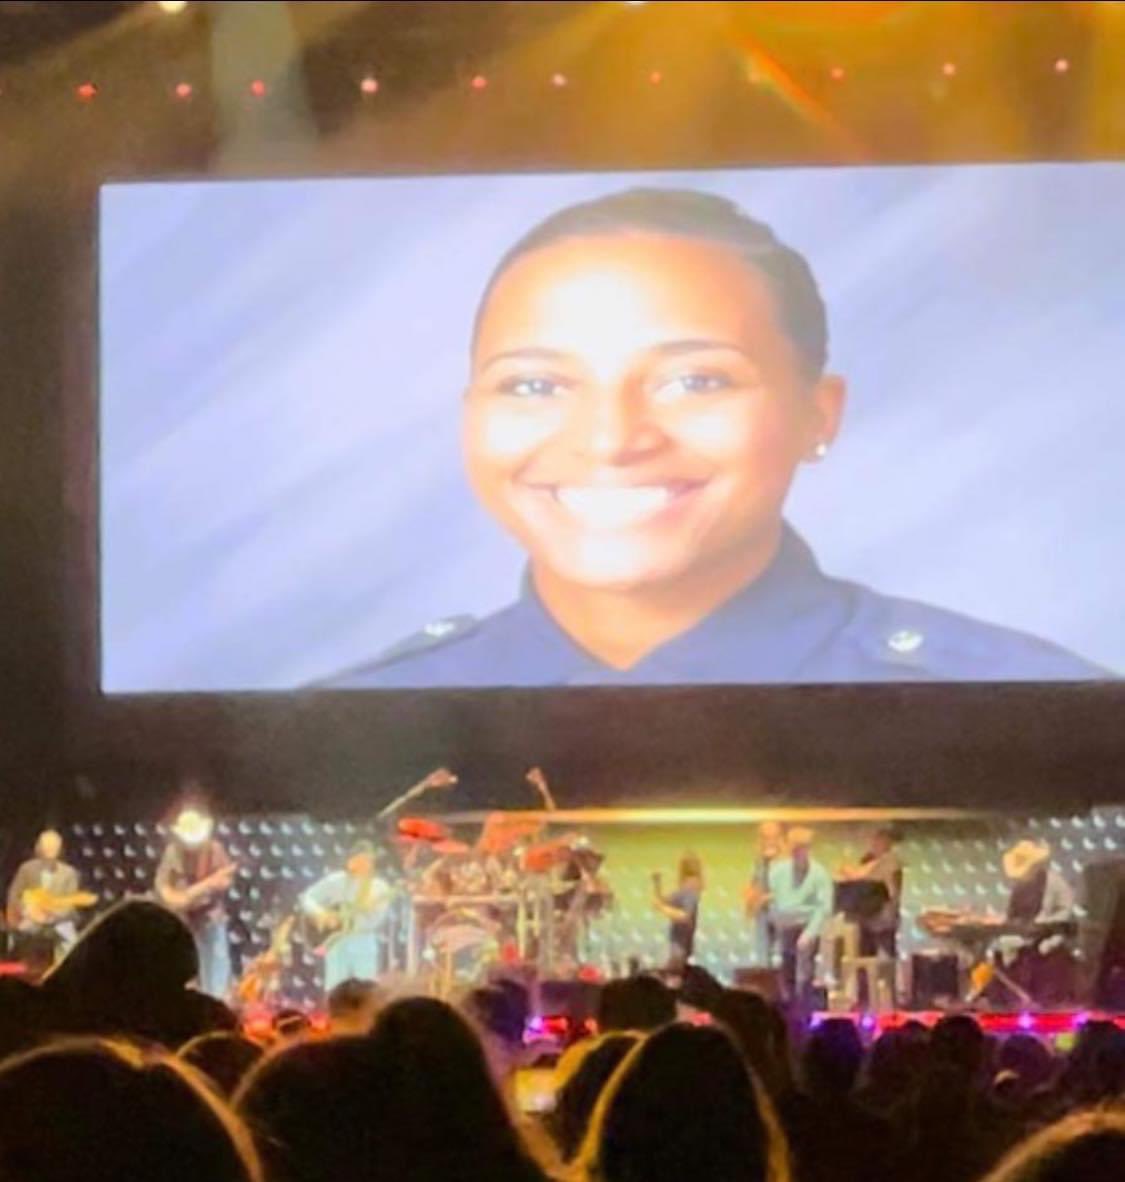 . @GeorgeStrait thank you so much for honoring Officer Leath at @LucasOilStadium last night. Bre was a tremendous person who made everyone around her better and she is missed very much by so many people. I just want to say that your tribute meant so much to so many of us,…